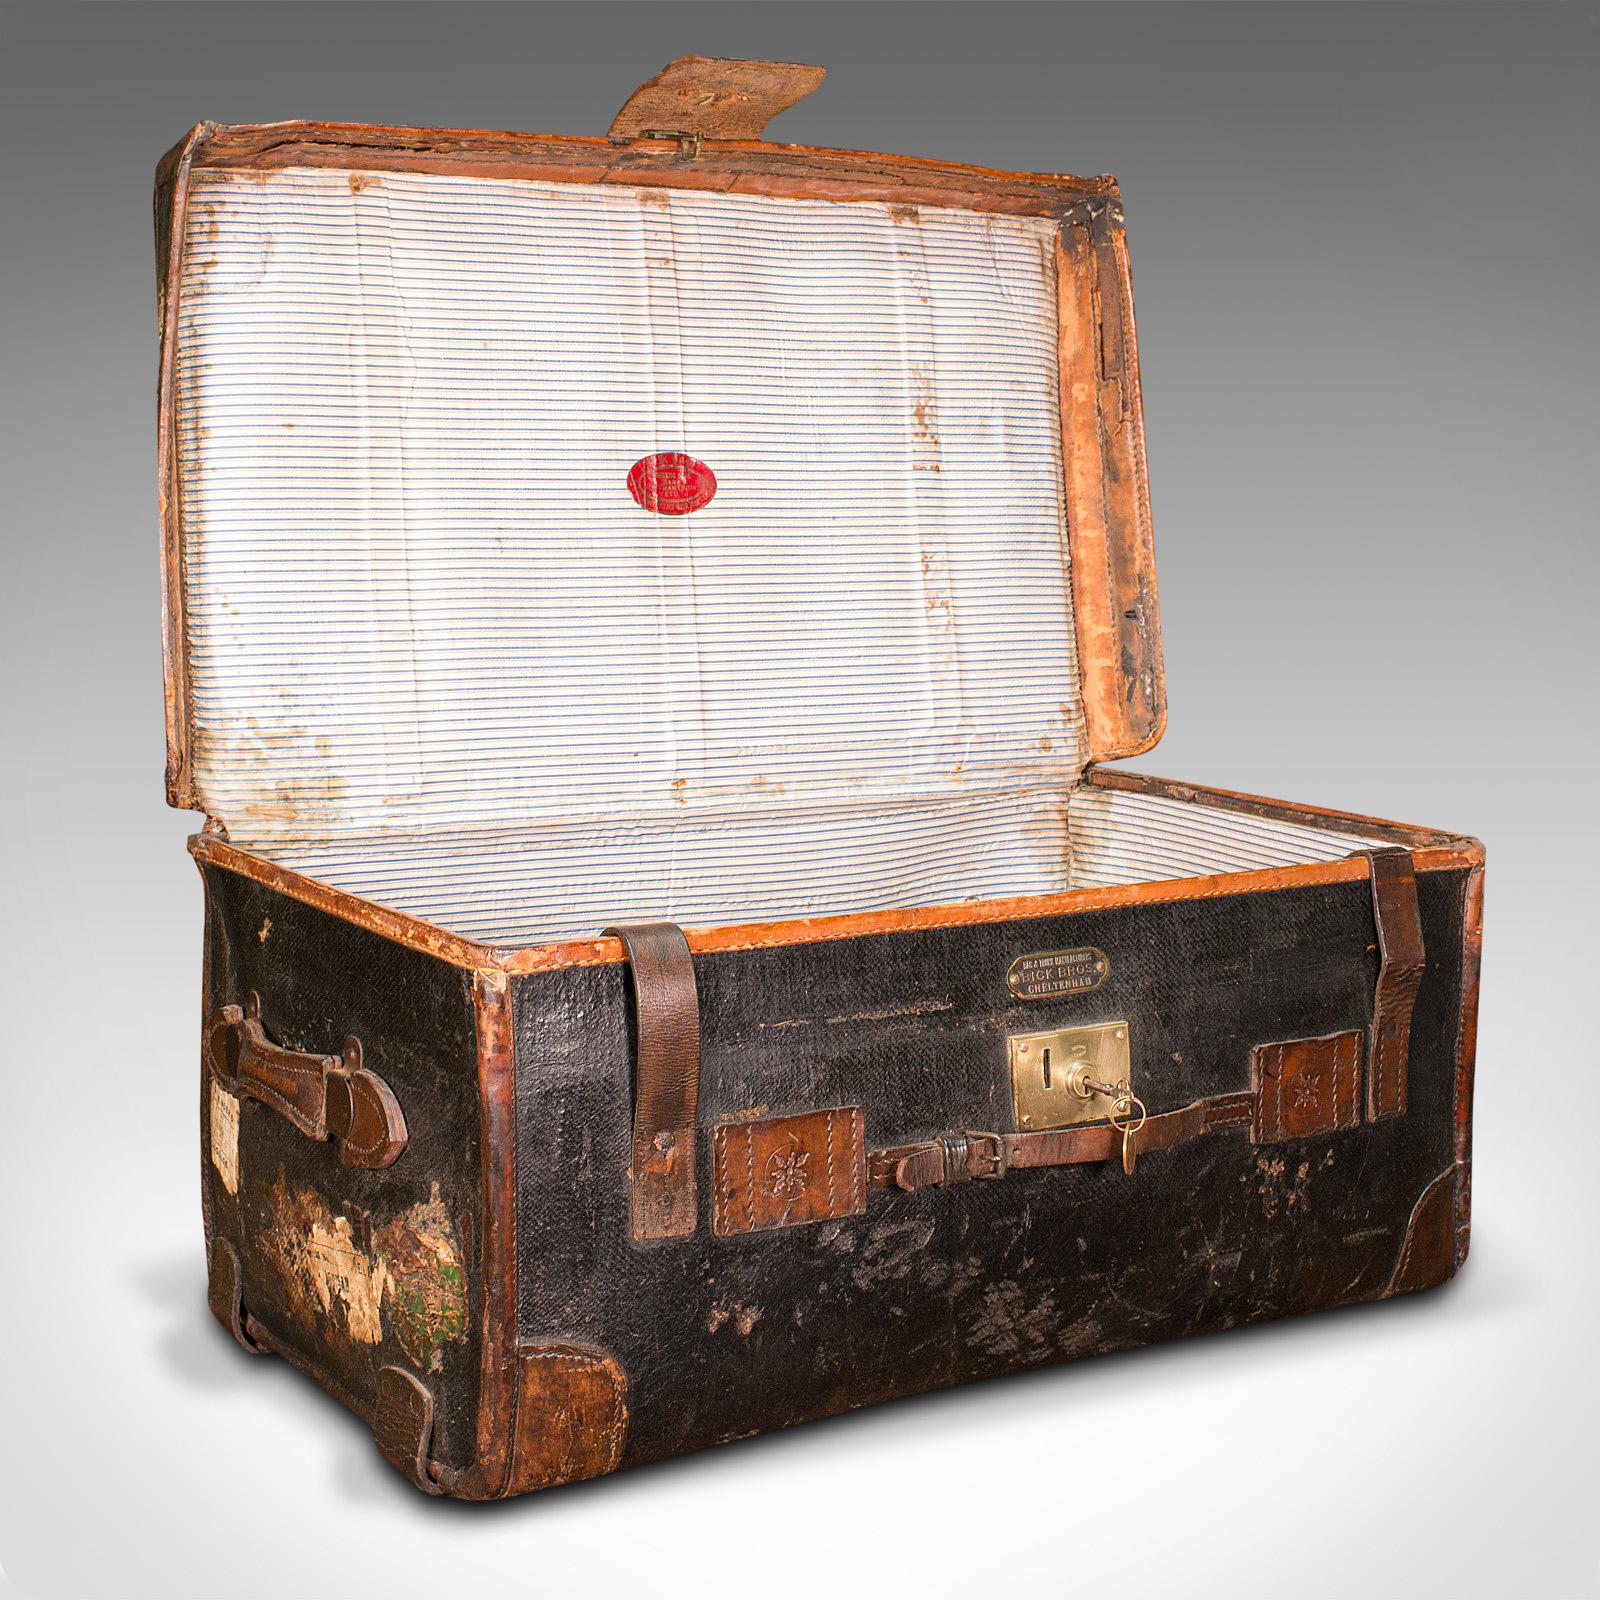 This is a vintage overseas voyage trunk. An English, leather bound travel case, dating to the early 20th century, circa 1930.

Wonderful time-worn appearance from years of travel
Displaying a desirably aged patina throughout
Dark leather